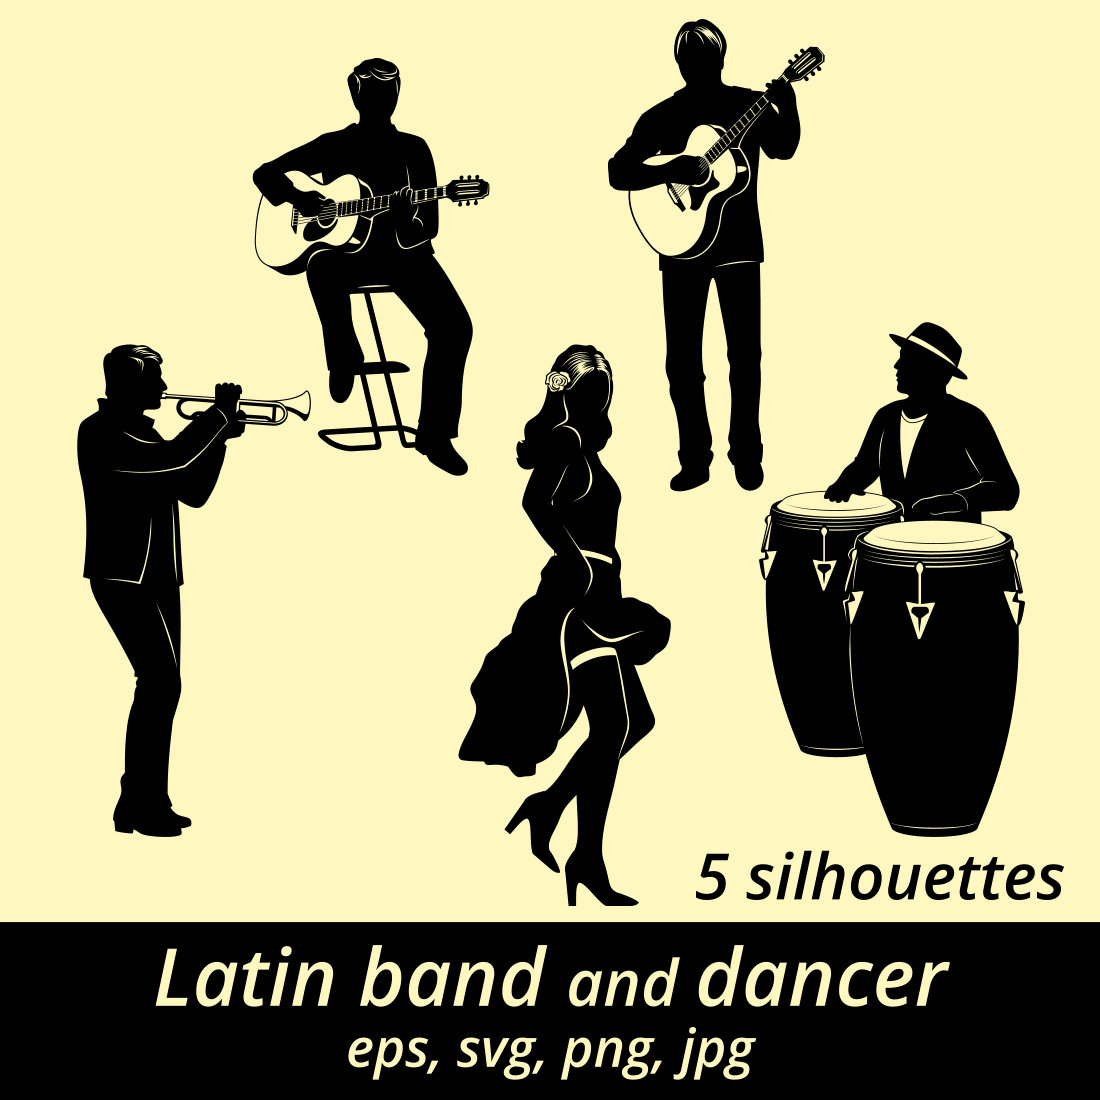 Latin Musicians and Dancer Silhouettes cover image.